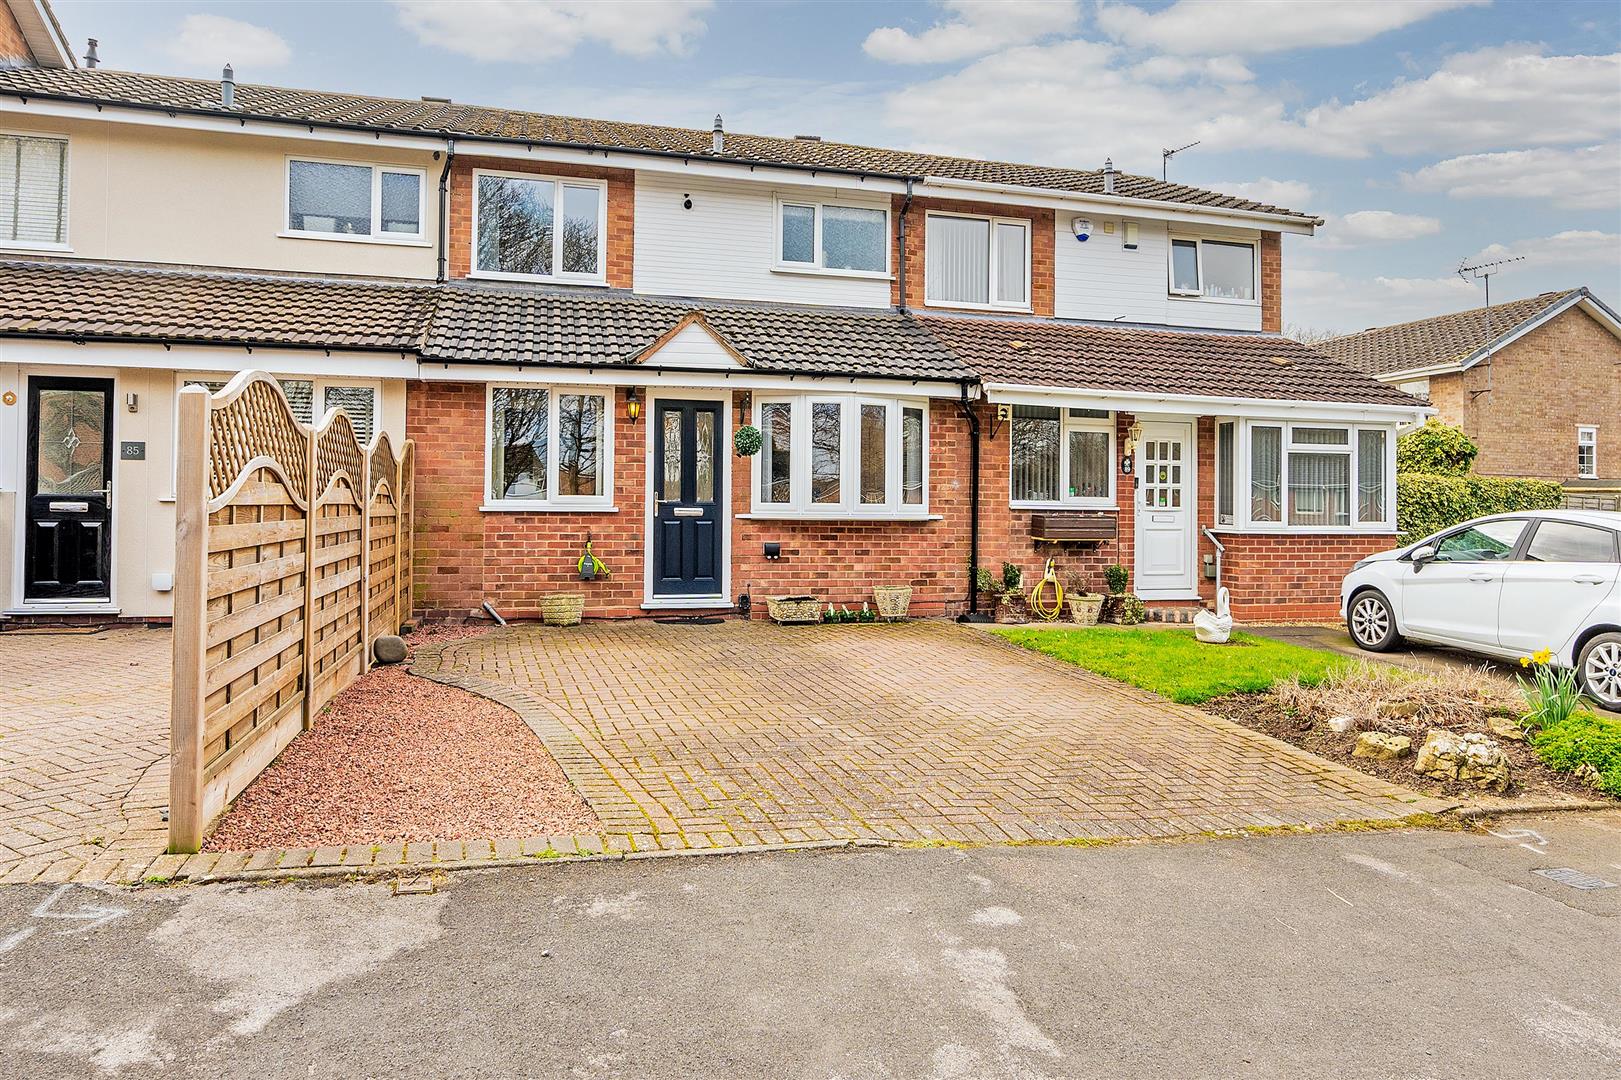 3 bed  for sale in Rowood Drive, Solihull, B92 